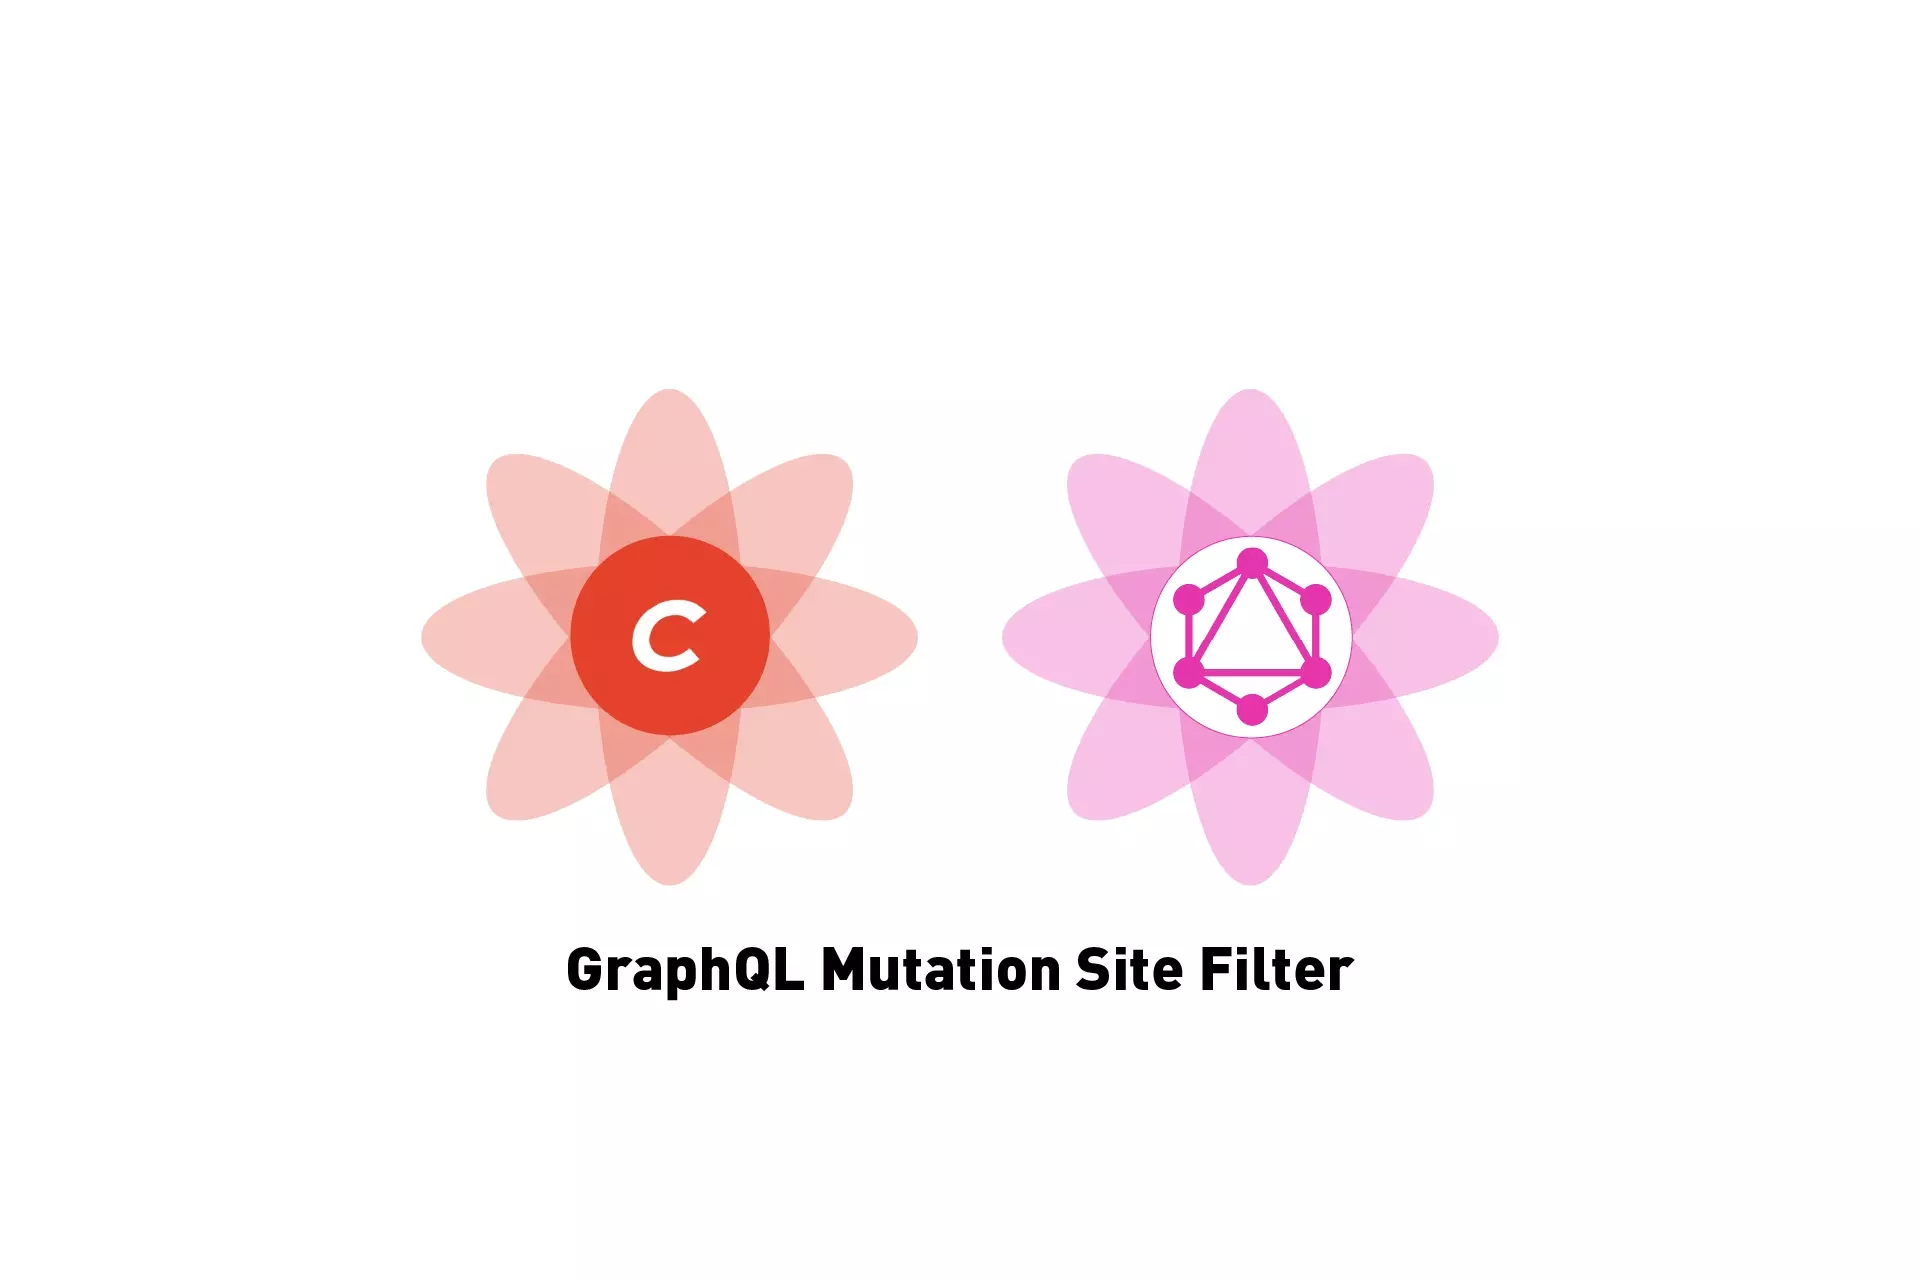 Two flowers that represent Craft CMS and GraphQL side by side. Beneath them sits the text "GraphQL Mutation Site Filter."